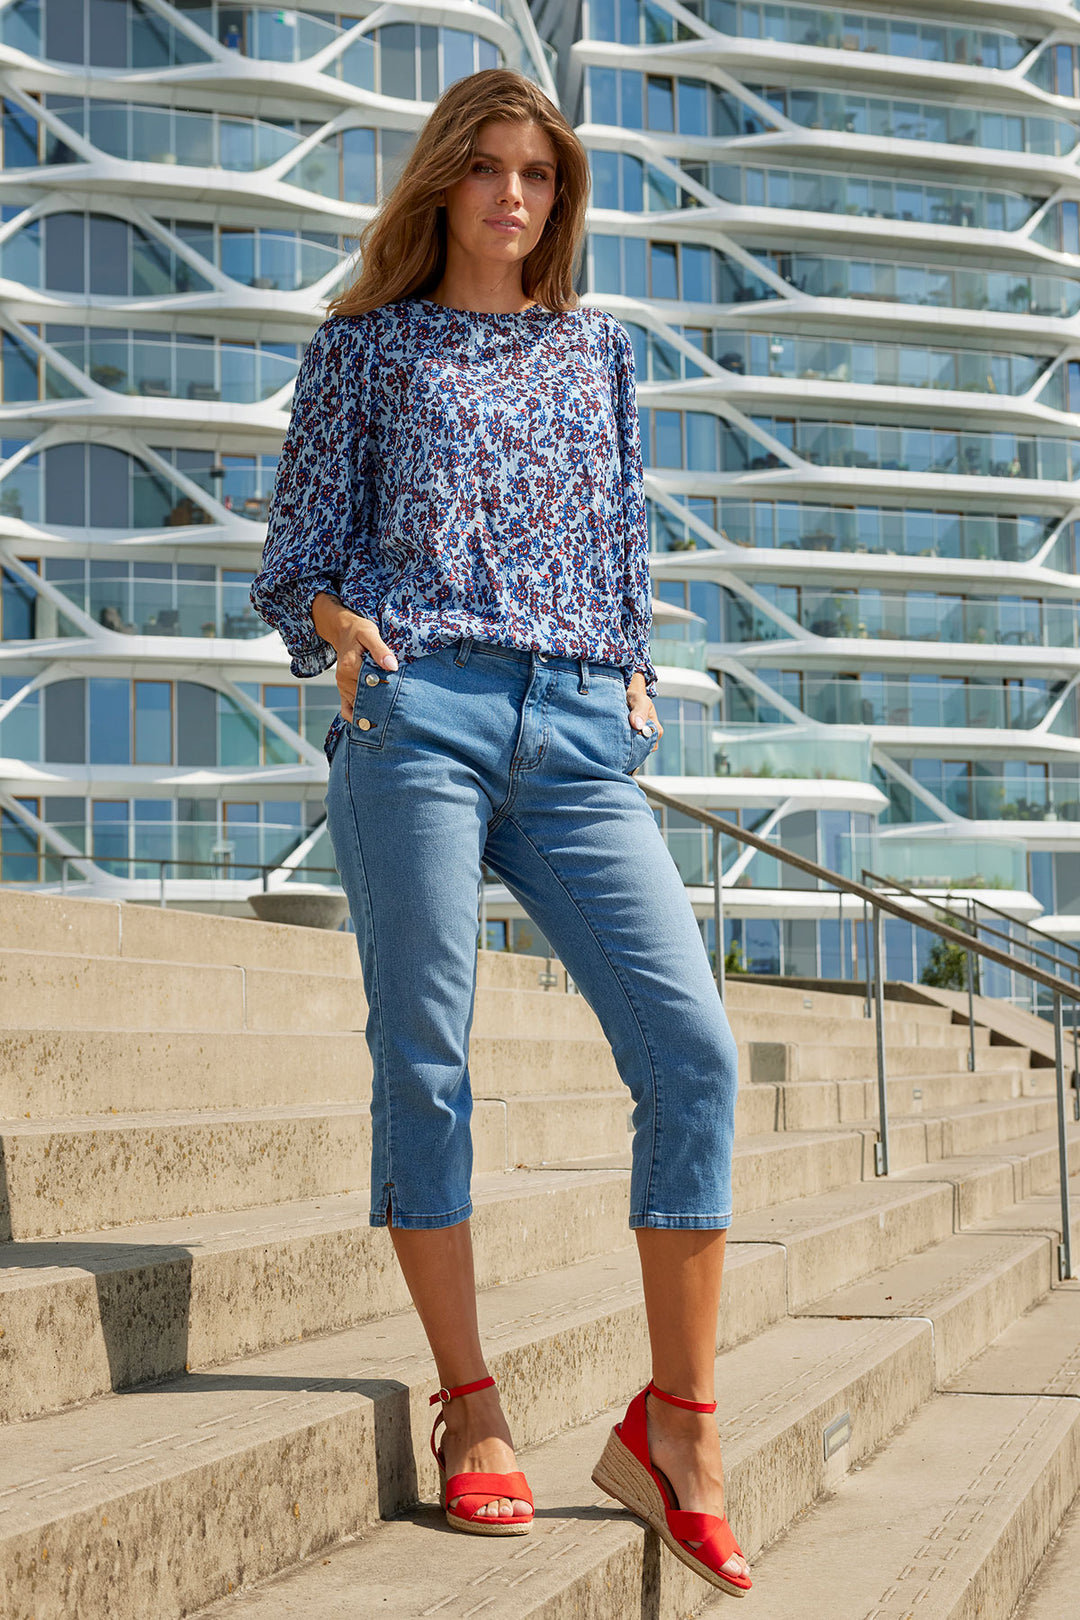 Sanne 387 - Light Blue Capri Pants: Stylish and Comfortable for Everyday Wear! Timeless Design with an Elegant Finish | ZE-ZE